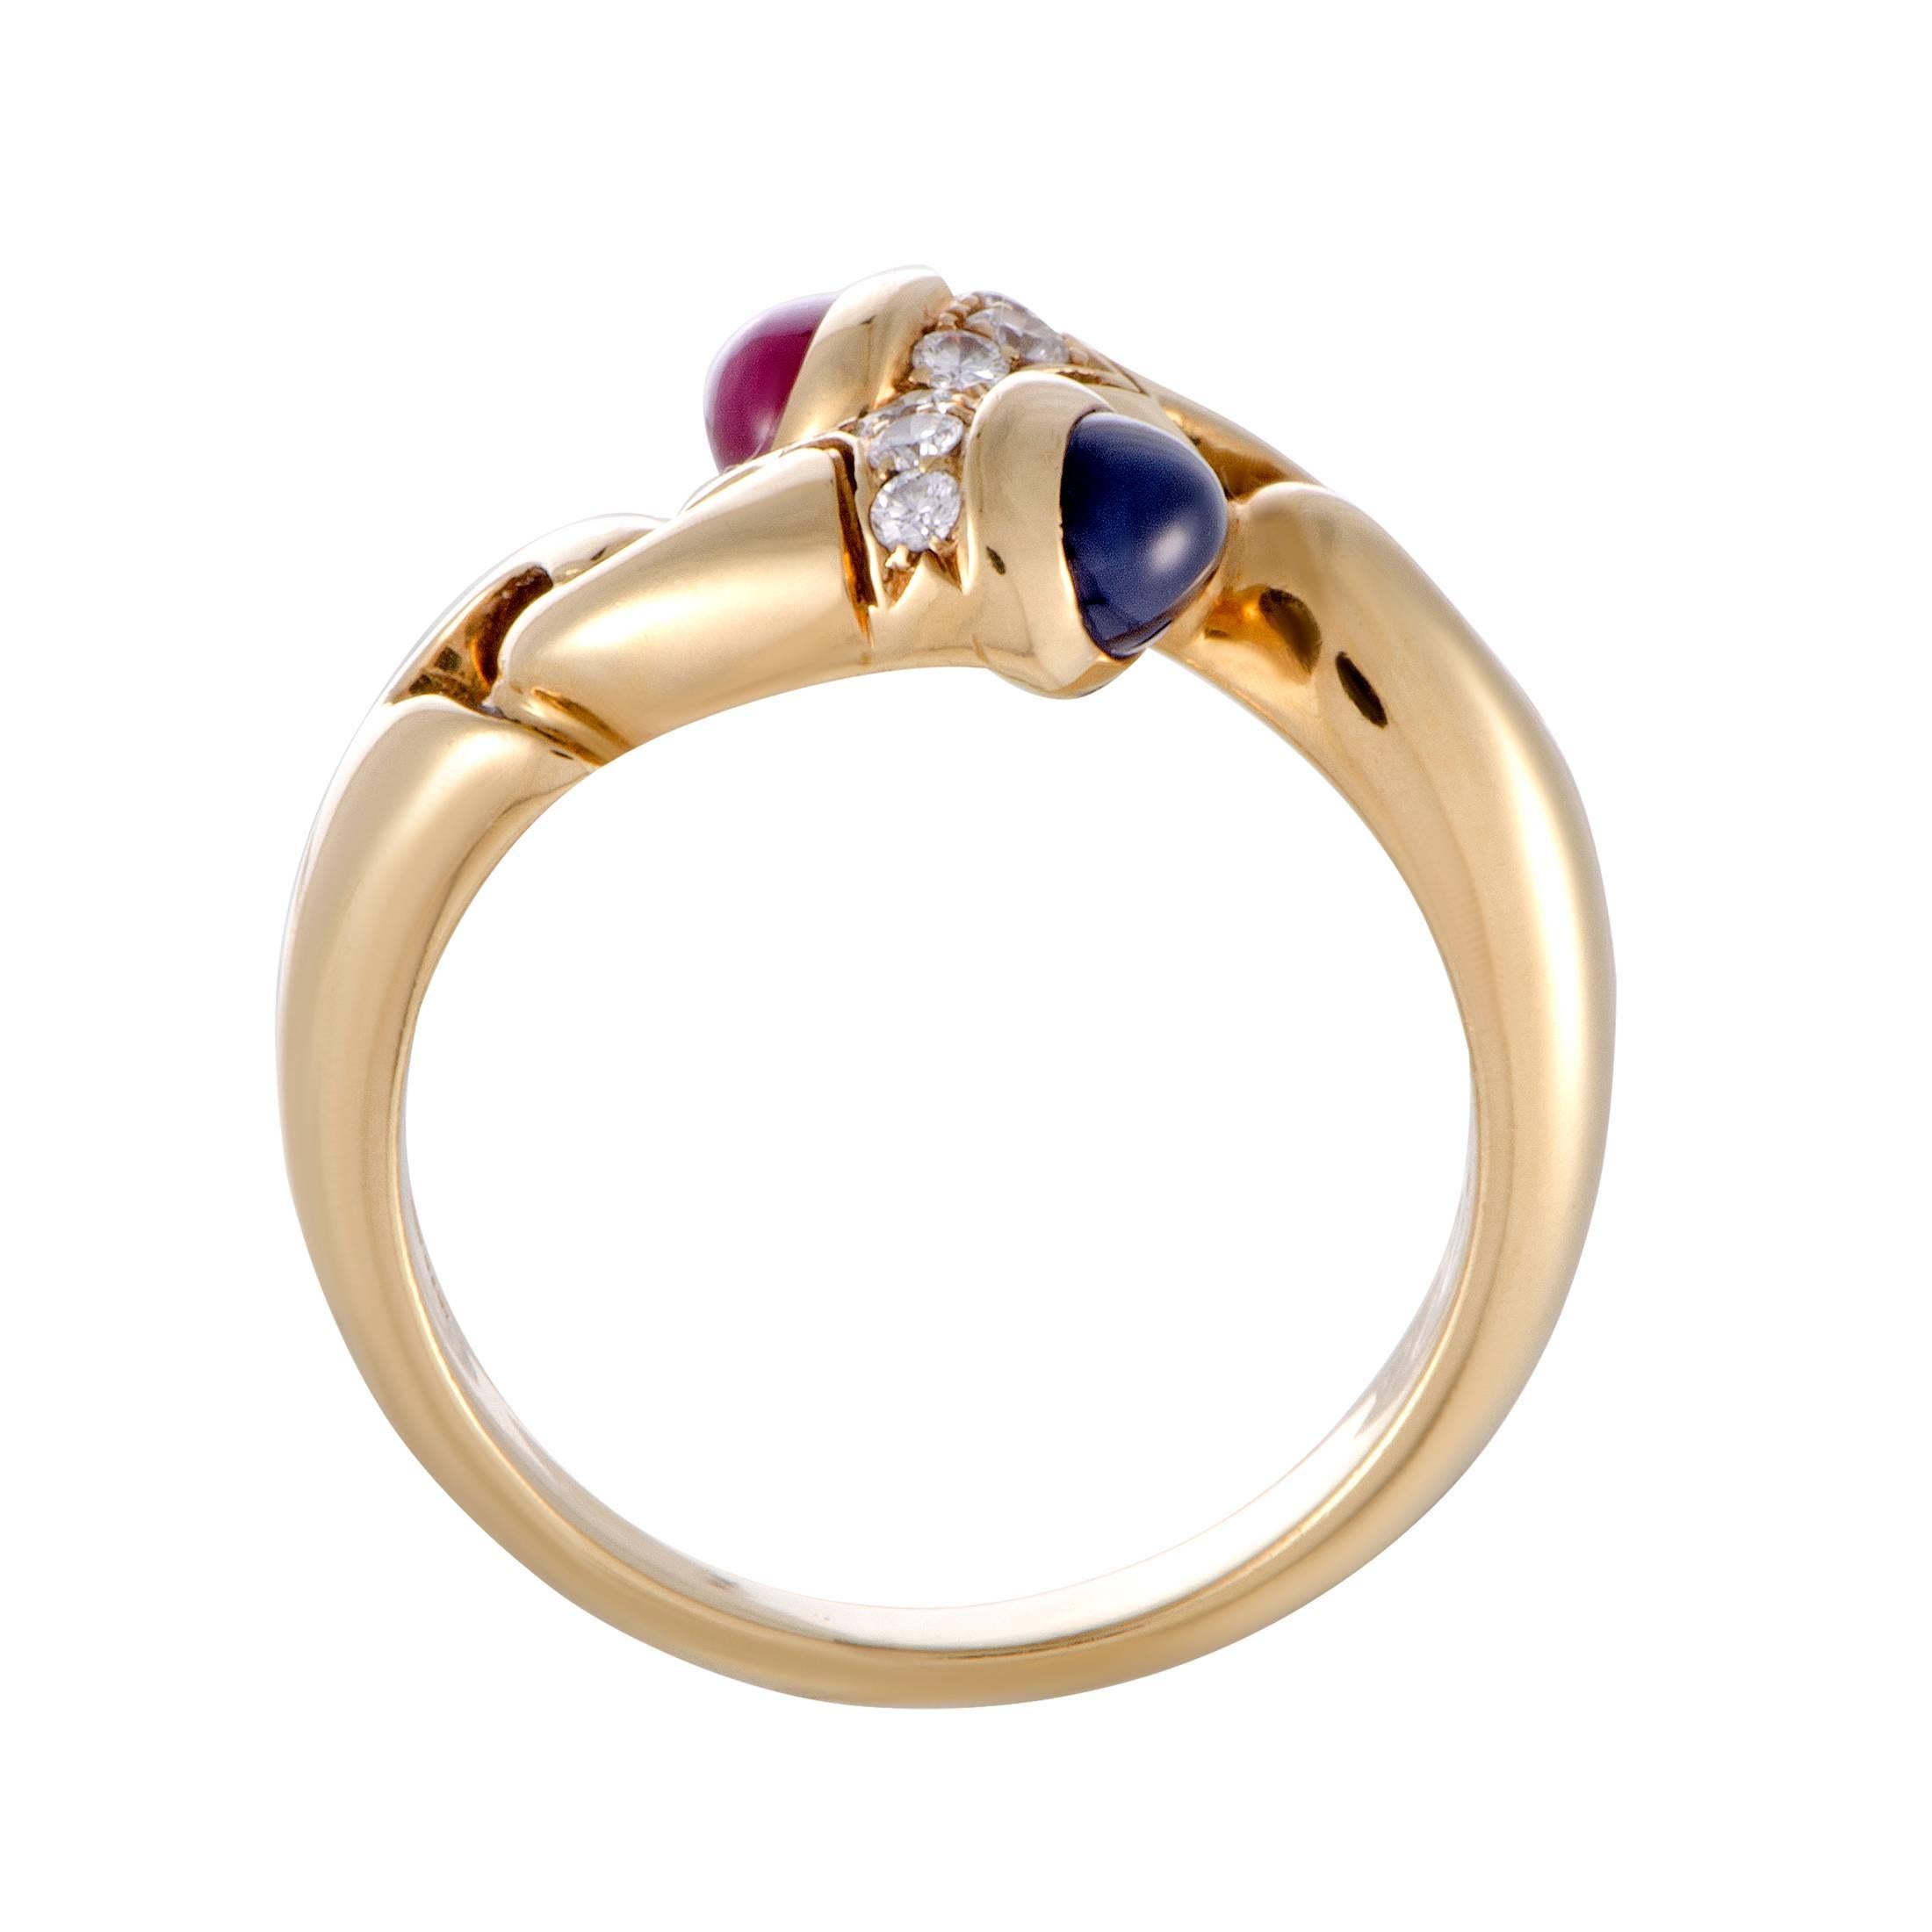 Designed by Bvlgari in a wonderfully unconventional manner, this superb ring is presented in luxurious 18K yellow gold and offers an incredibly eye-catching look. The ring is embellished with a splendid sapphire and a striking ruby that are